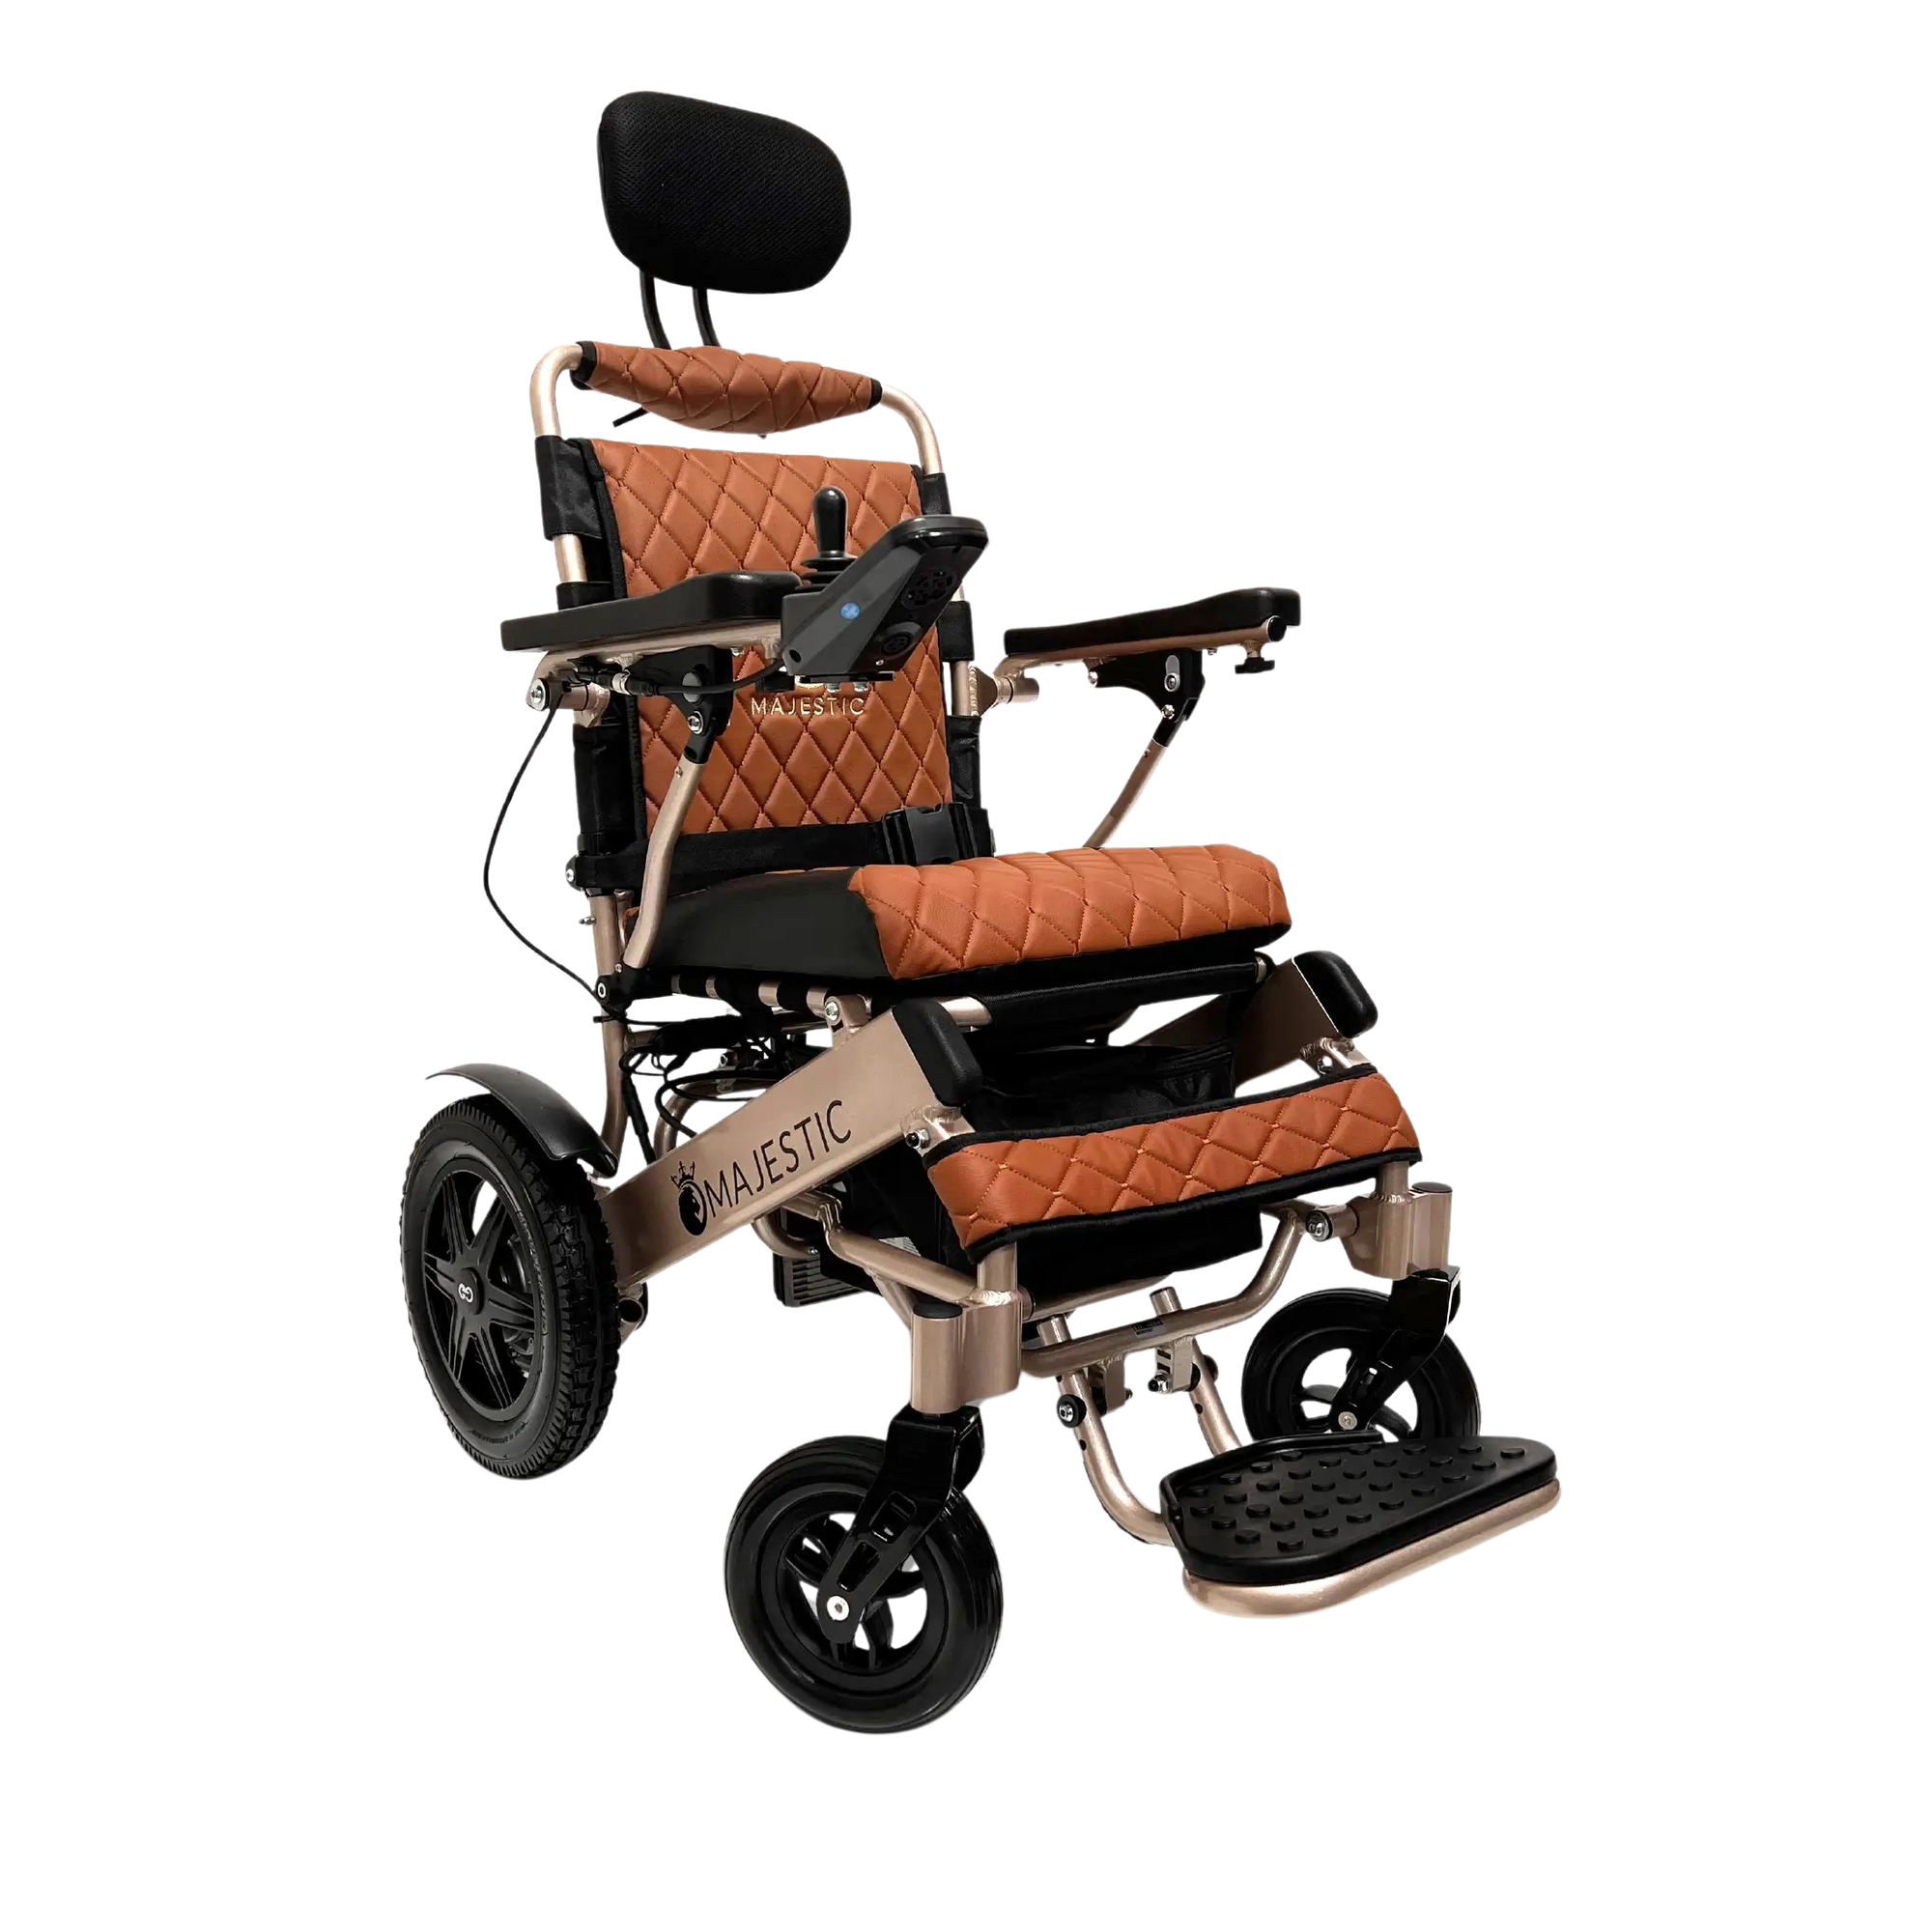 ComfyGO IQ-9000 Auto Recline Majestic Remote Controlled Travel Manual Folding Electric Wheelchair New